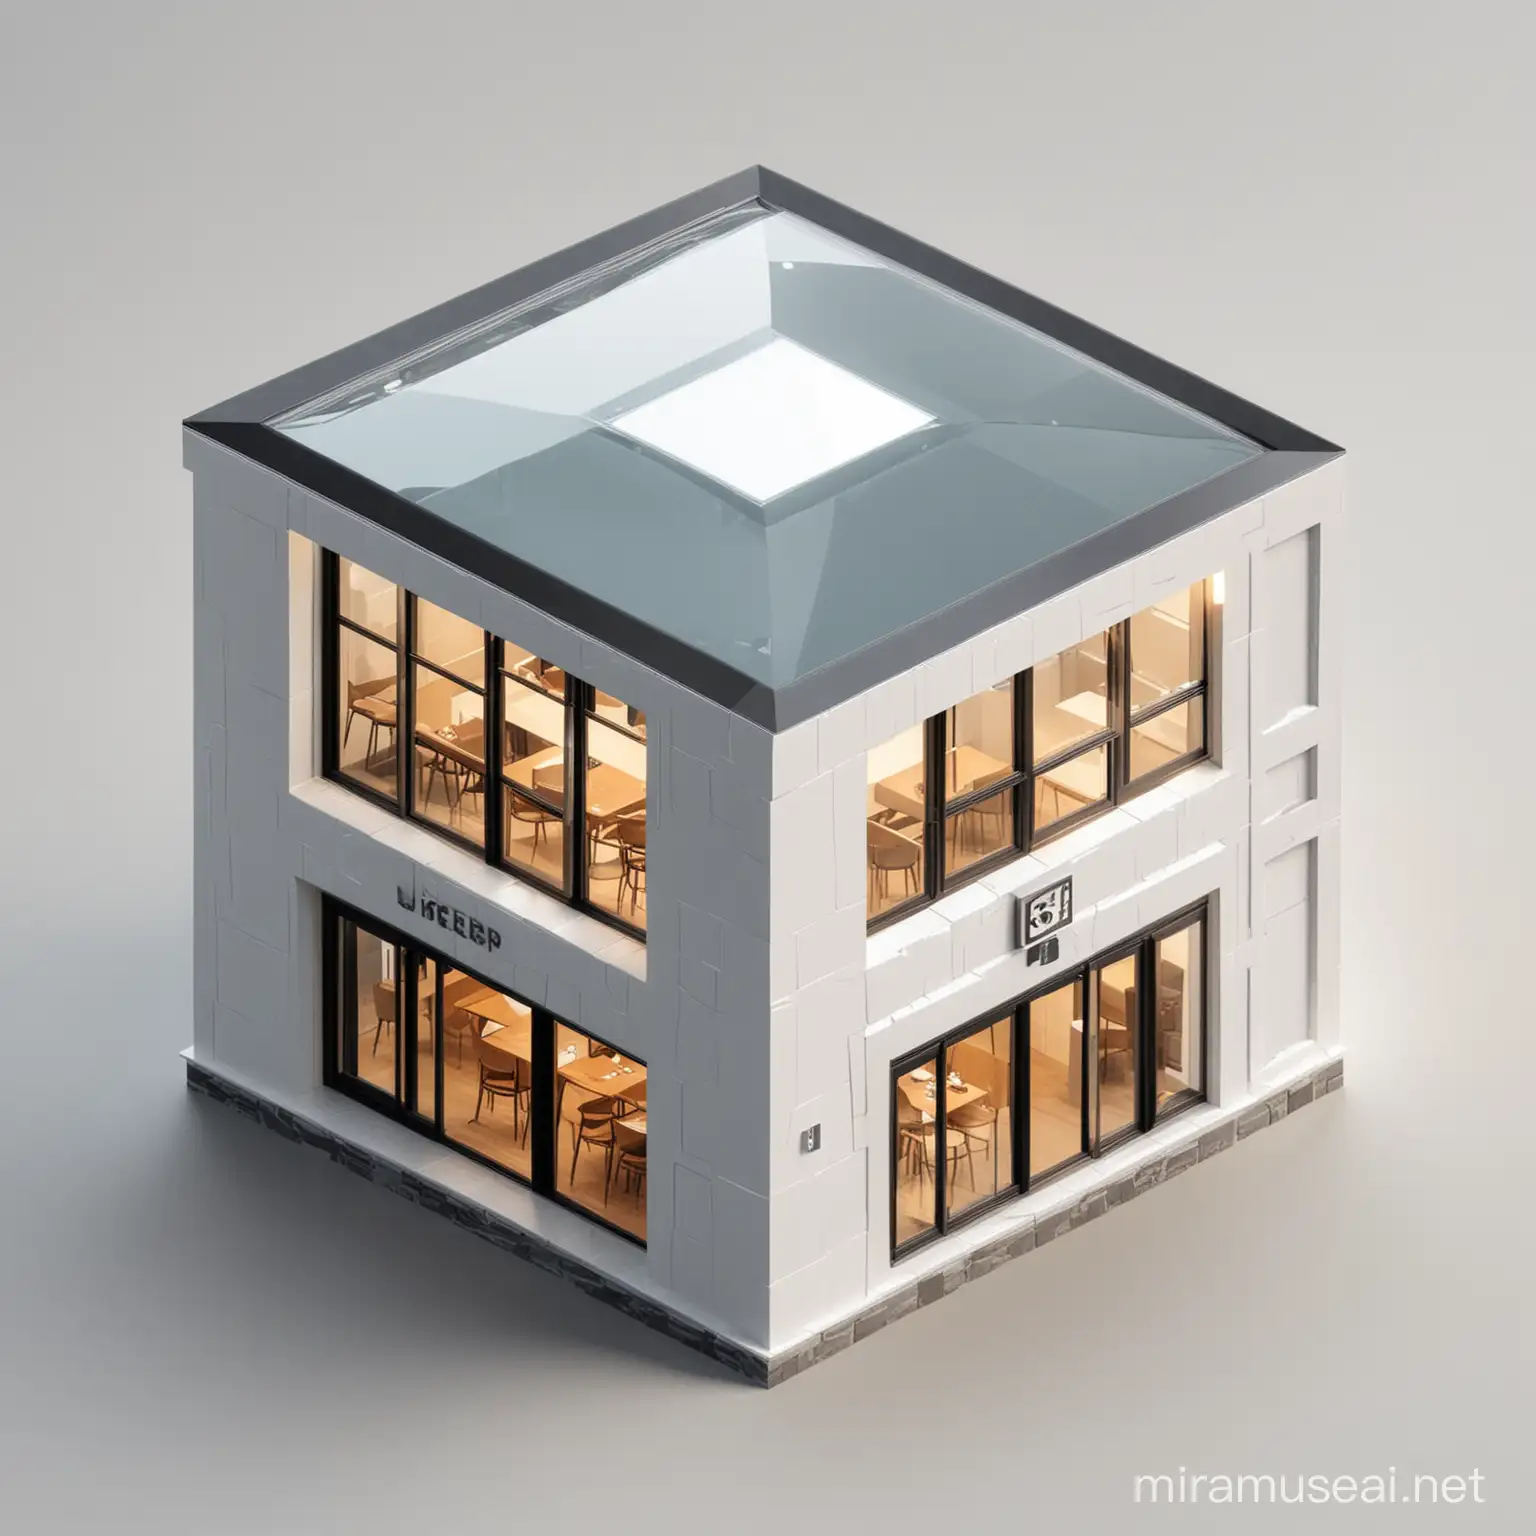 restaurant cube-shaped icon image, isometric icon style, minimalist theme, only 1 door and few windows, glass doors and windows, no walls, black outlines, white walls, company logo on top, details on exterior only, 